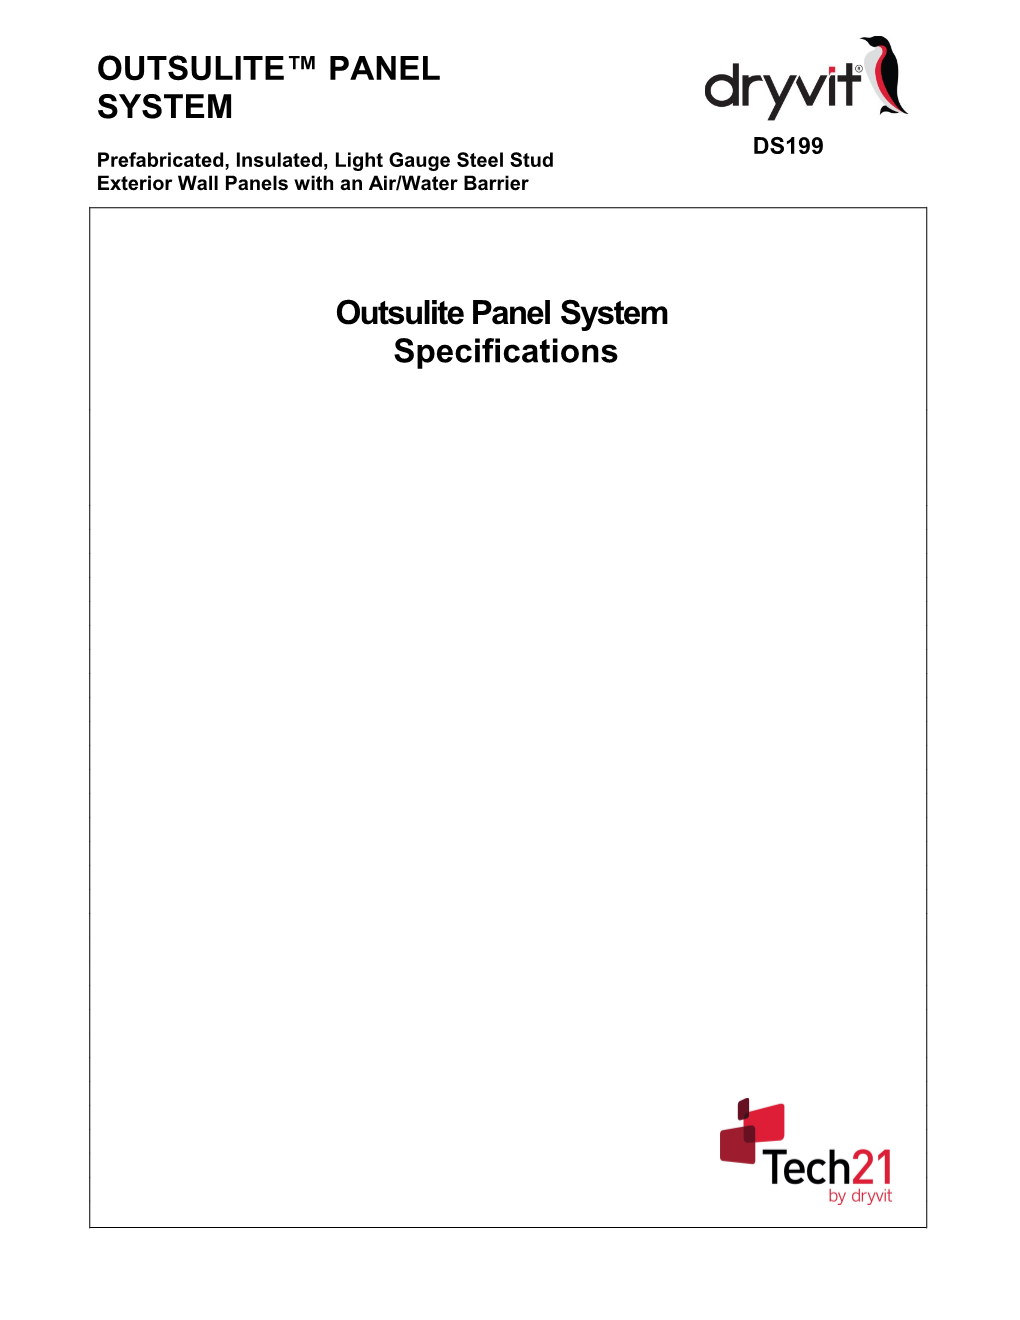 Outsulation PFP System - DS199